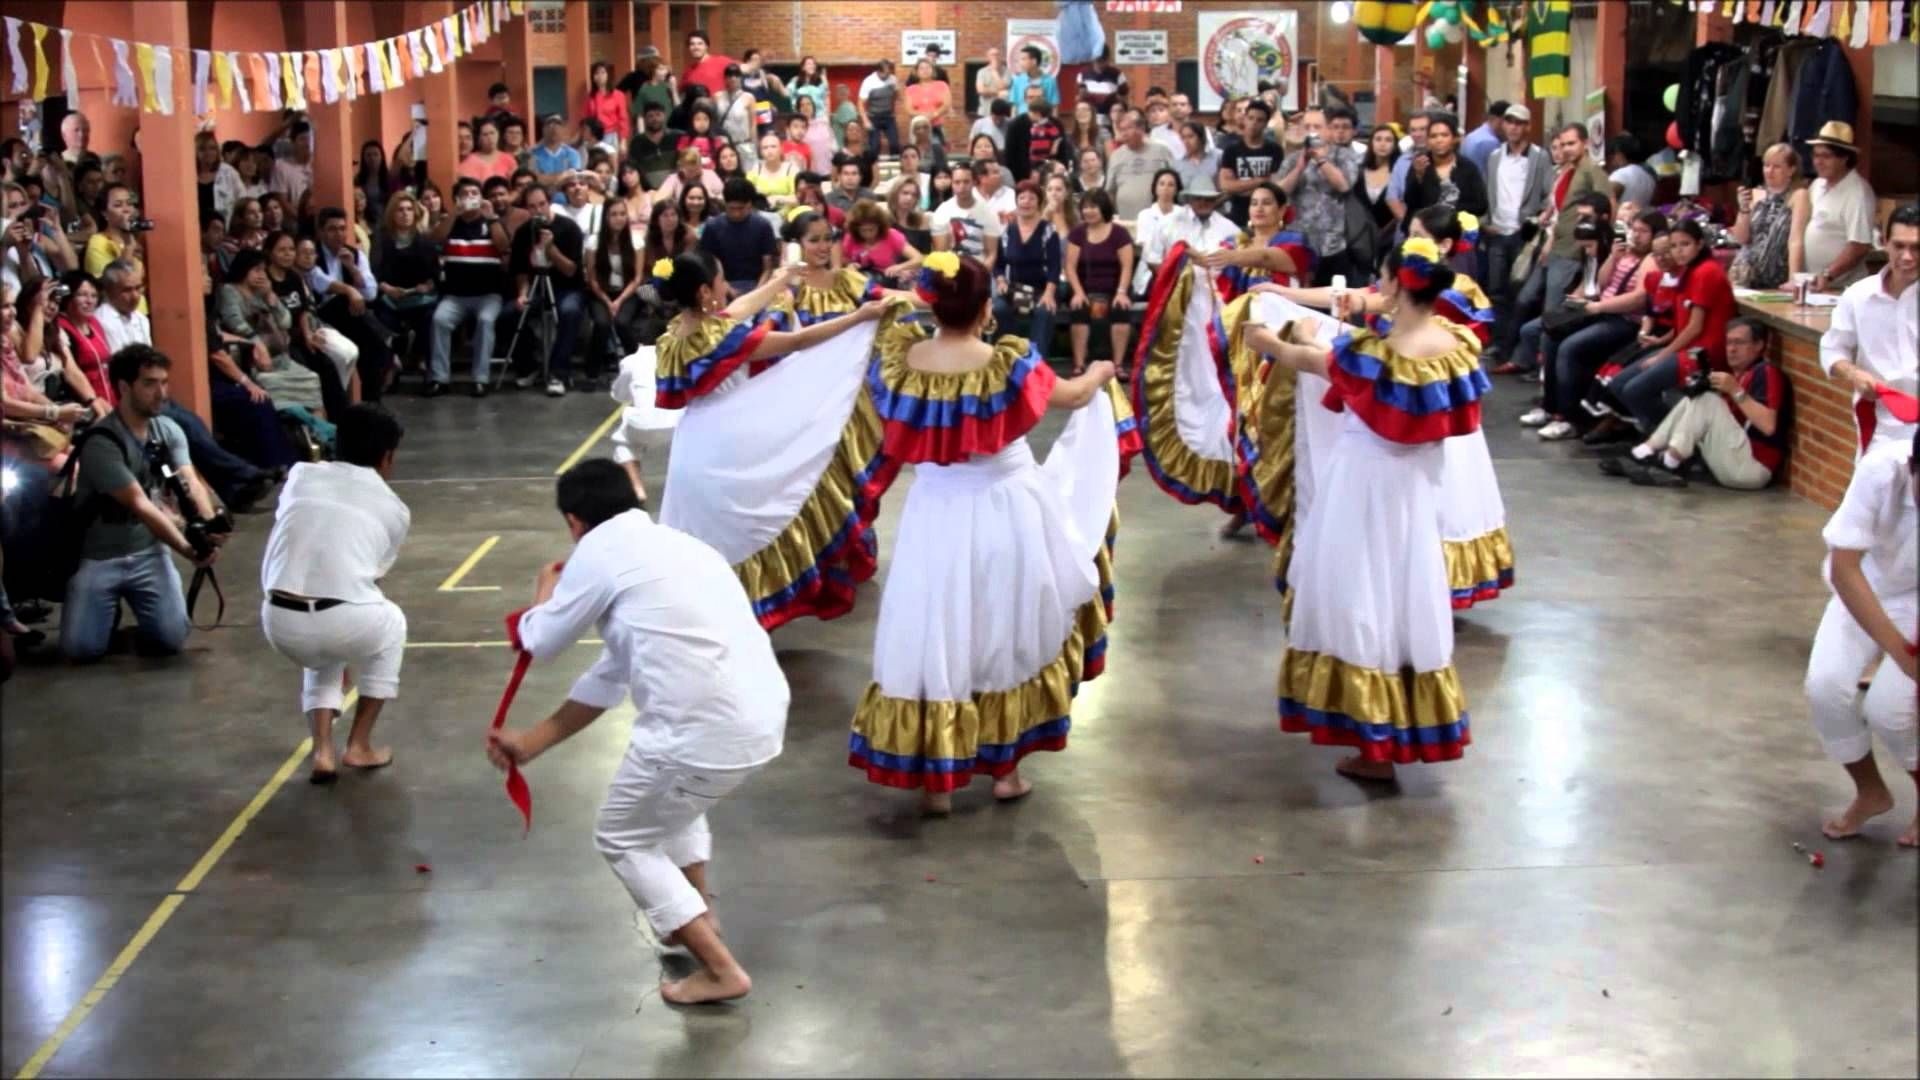 Cumbia: National traditions, A dance of courtship where young men and women dressed up mostly in white. 1920x1080 Full HD Wallpaper.